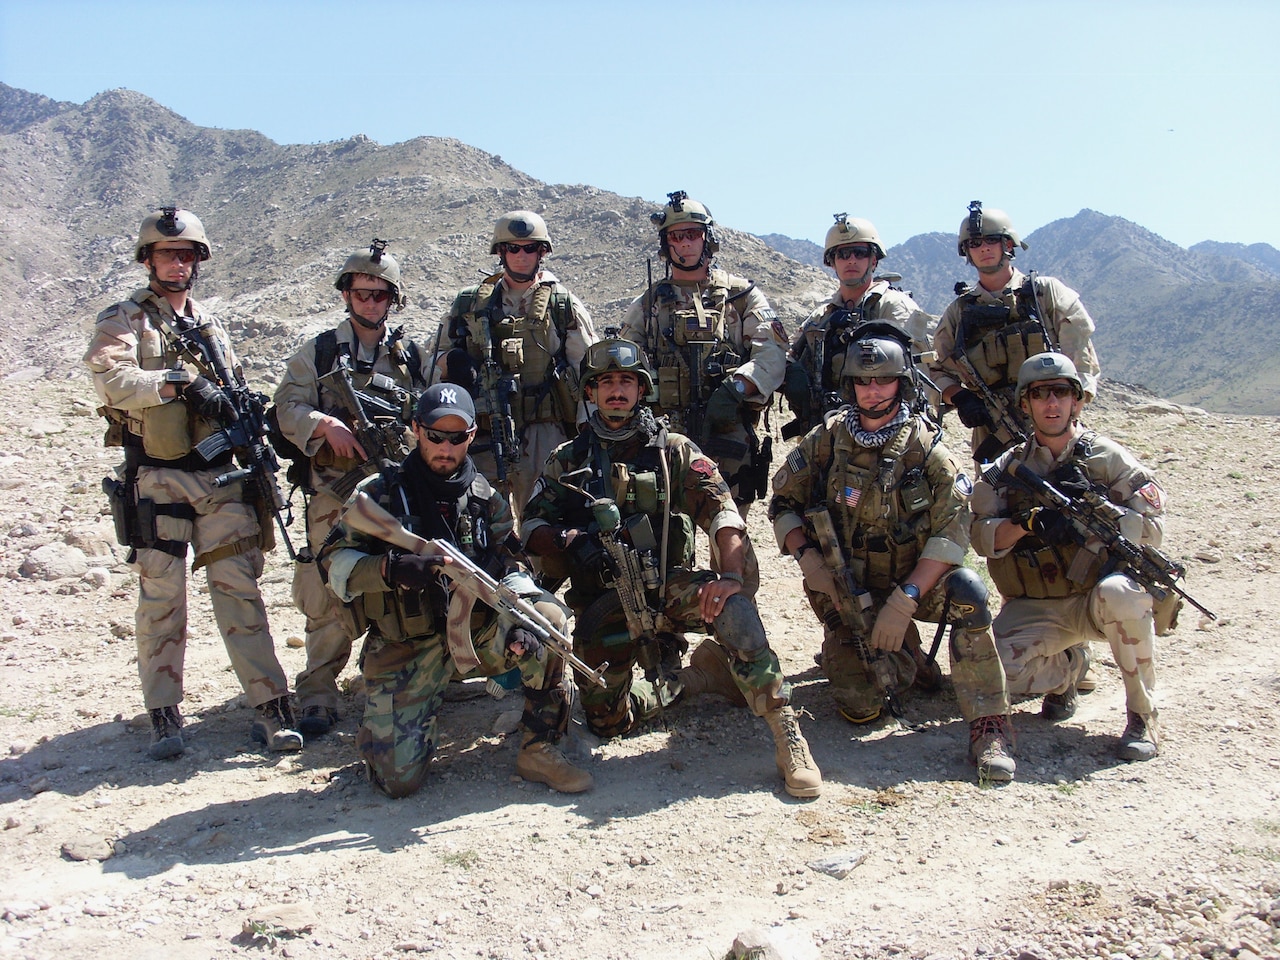 A group of soldiers dressed in full battle uniform pose together on the top of a mountain.